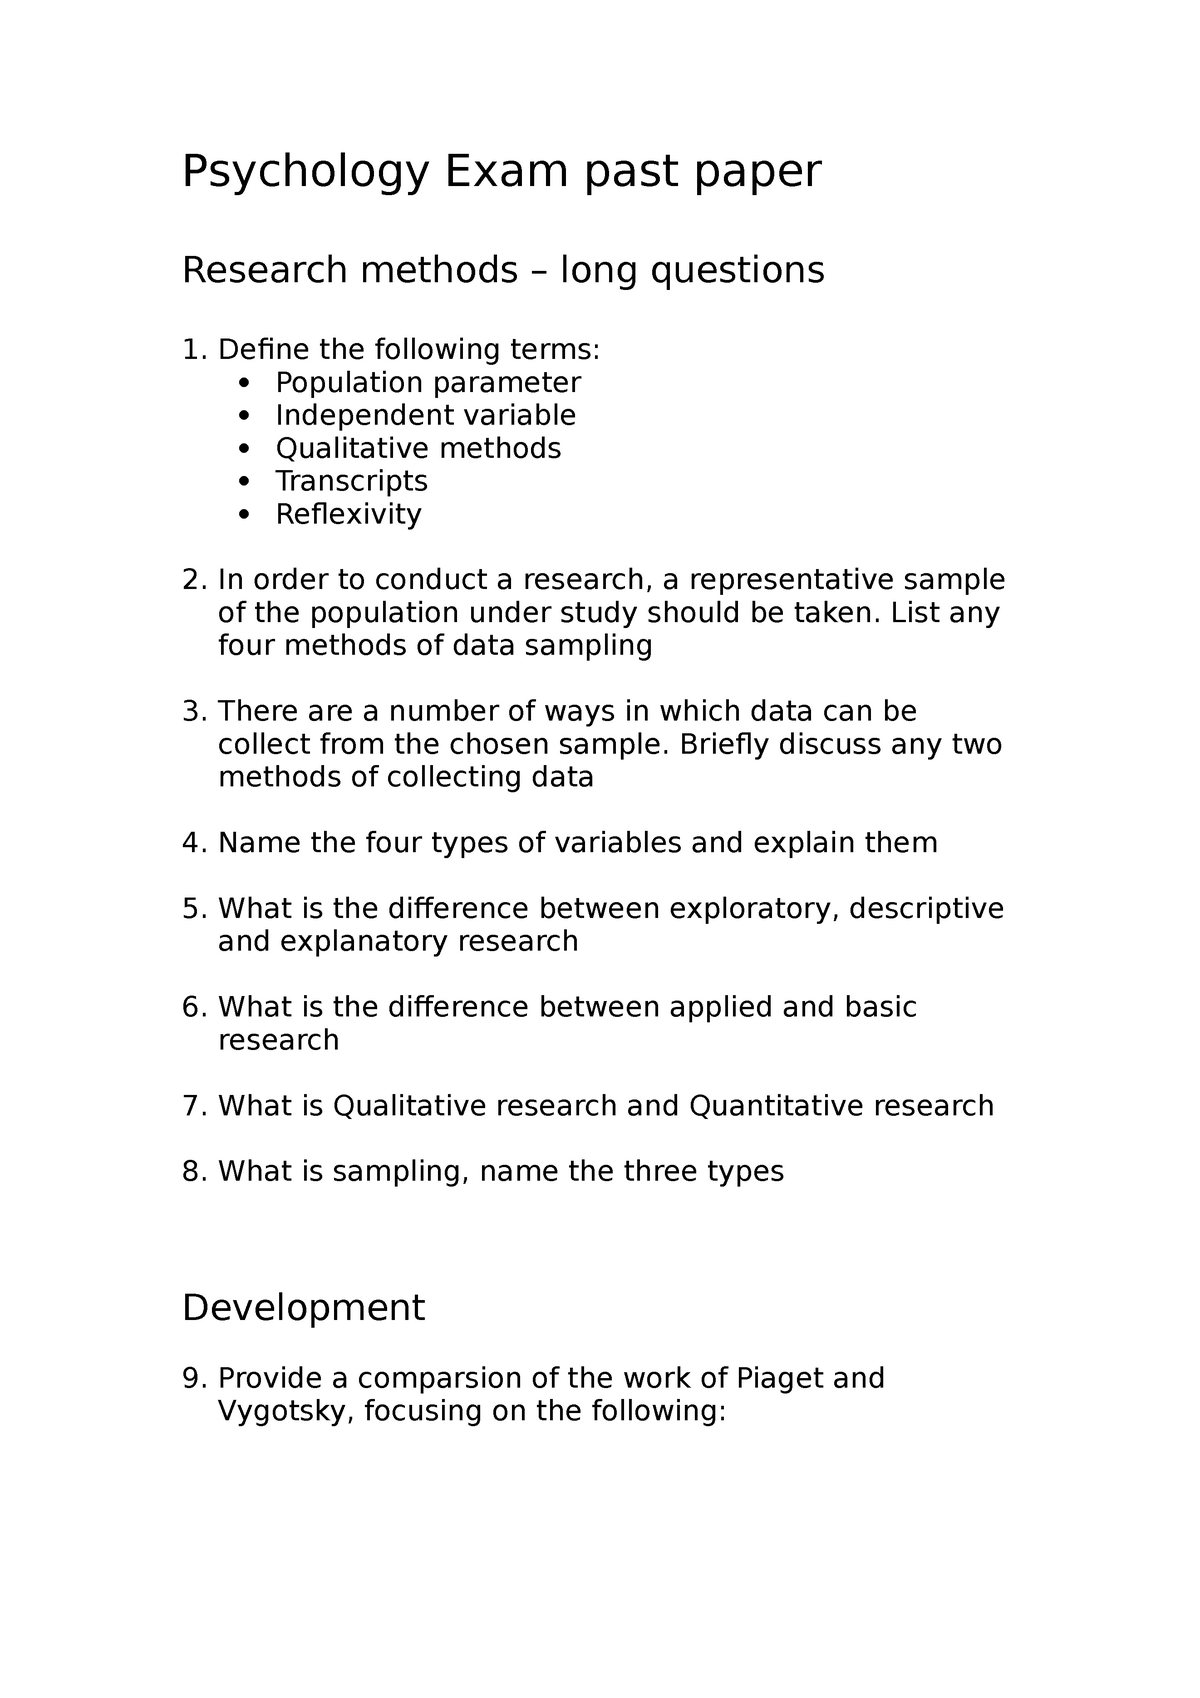 research methods in psychology past paper questions